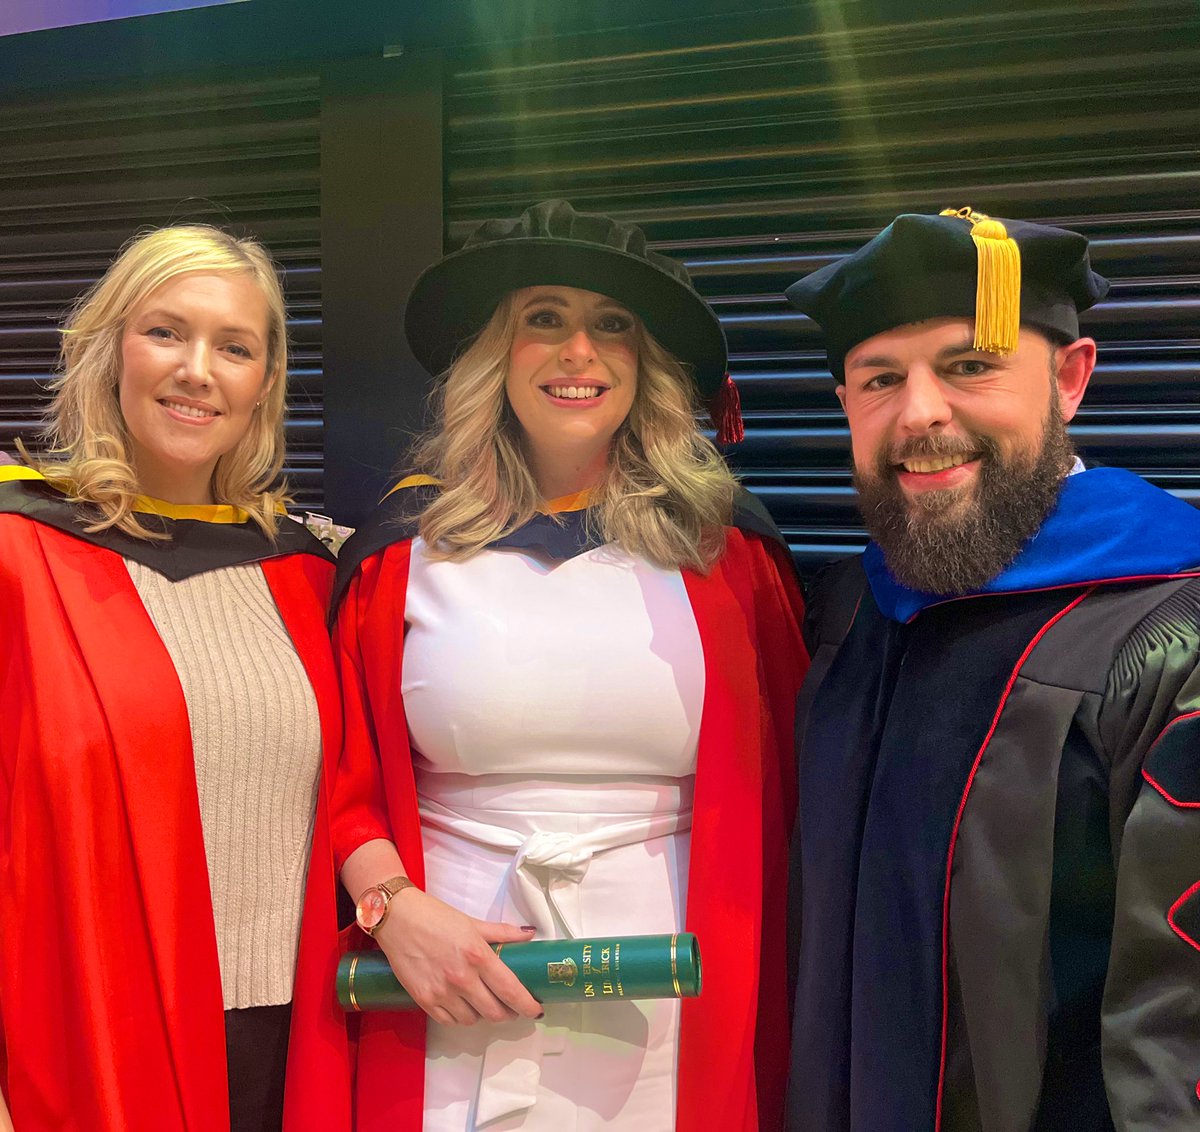 Fantastic to see @Eibhlin_W graduate today with her PhD ✨ Her thesis explored school suicide prevention & was supervised by @JennytalksPsych & @mph8 Eibhlin has taken up a role with the @NSRFIreland - we know she will do amazing things in the future. Huge congratulations 🍾🎊